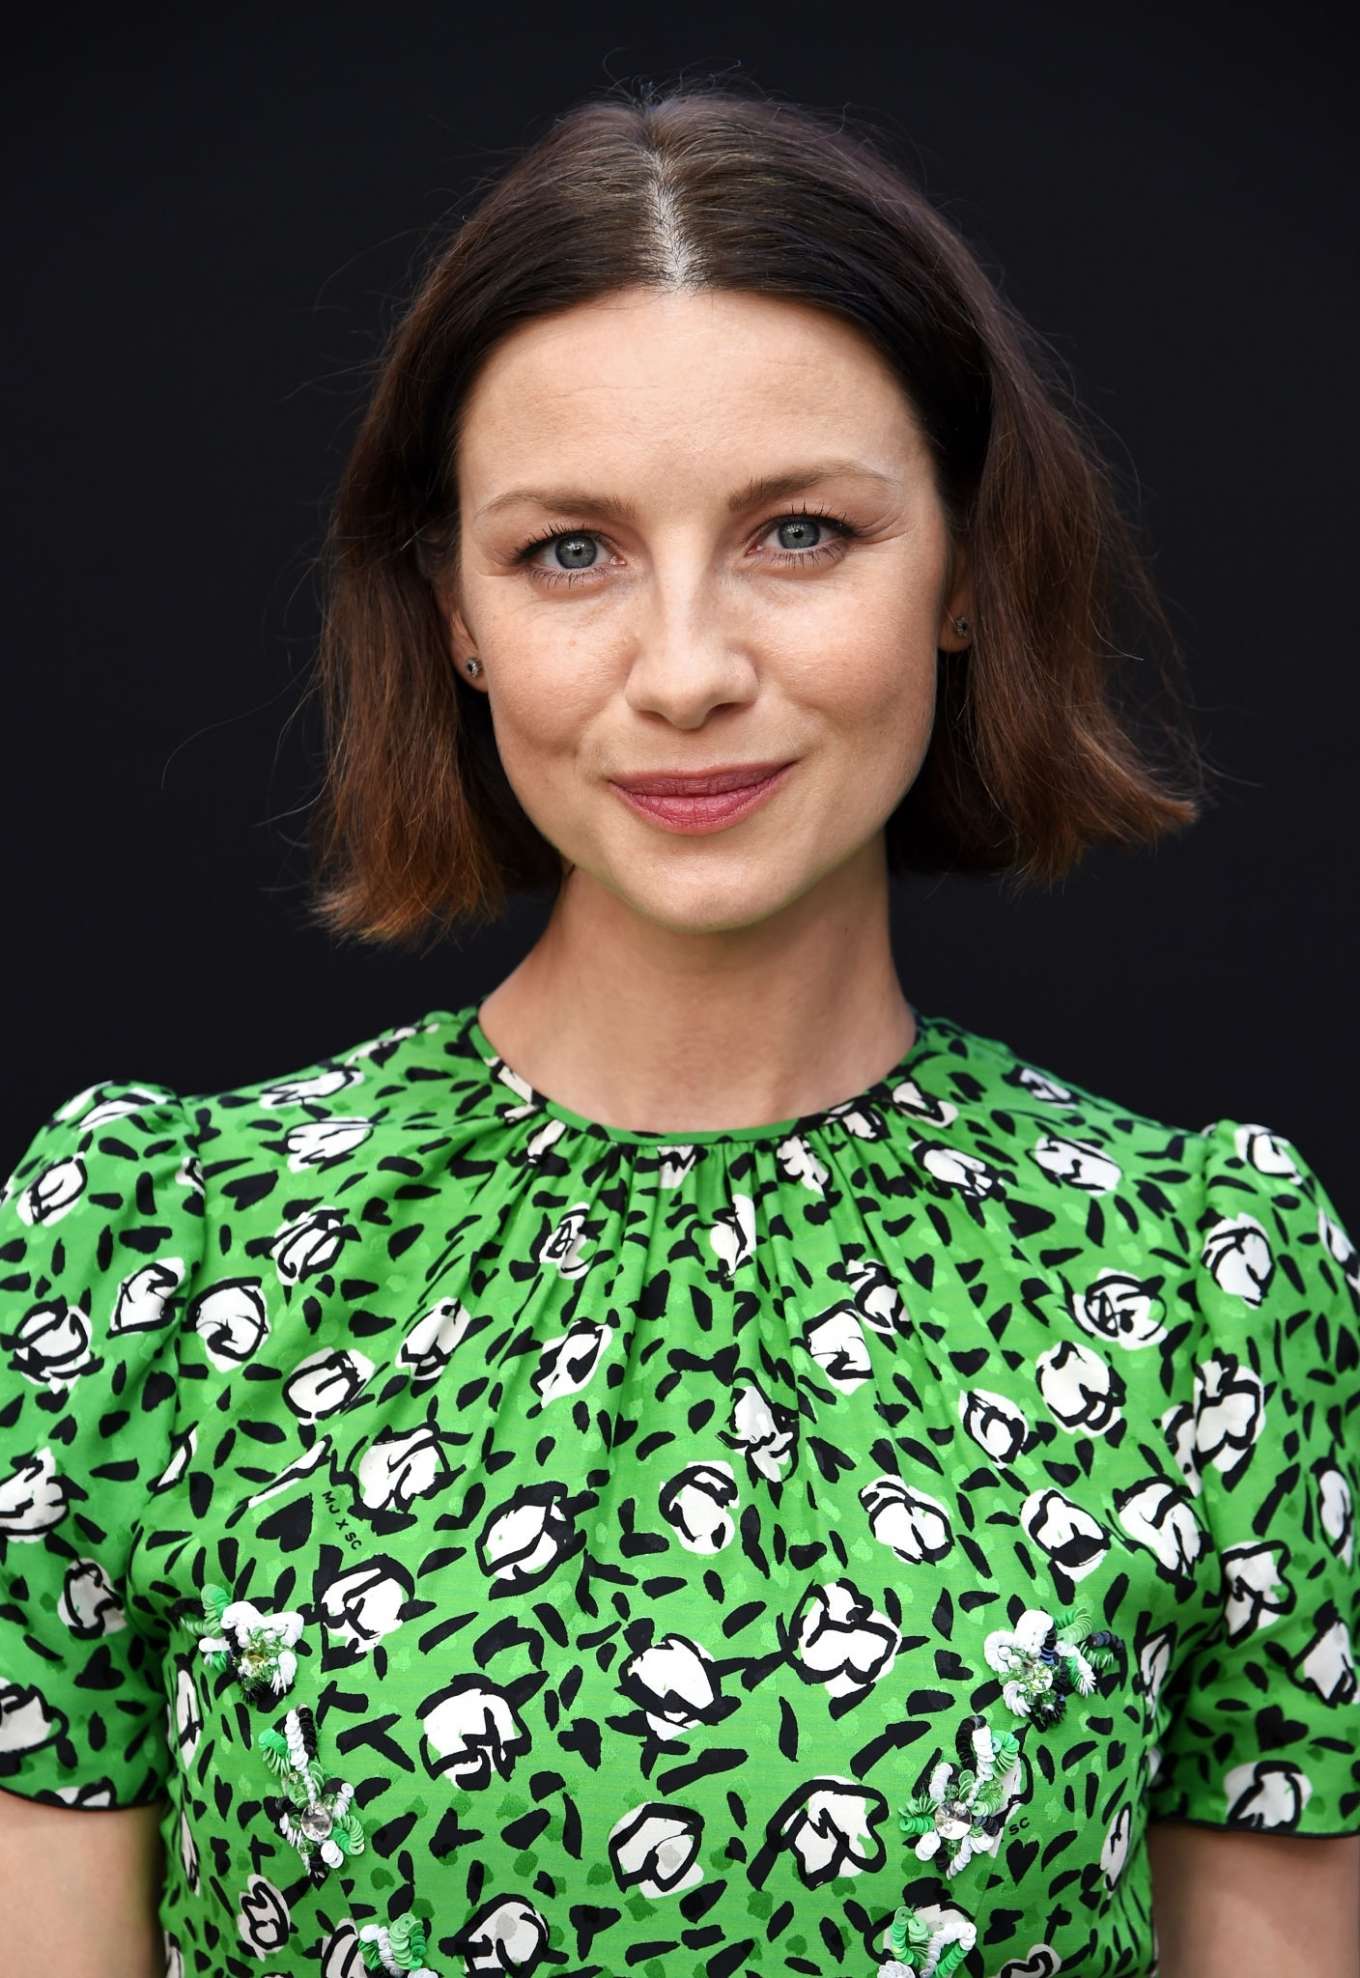 Caitriona Balfe â€“ Where Creativity Culture and Conversations Collide at Starz FYC 2019